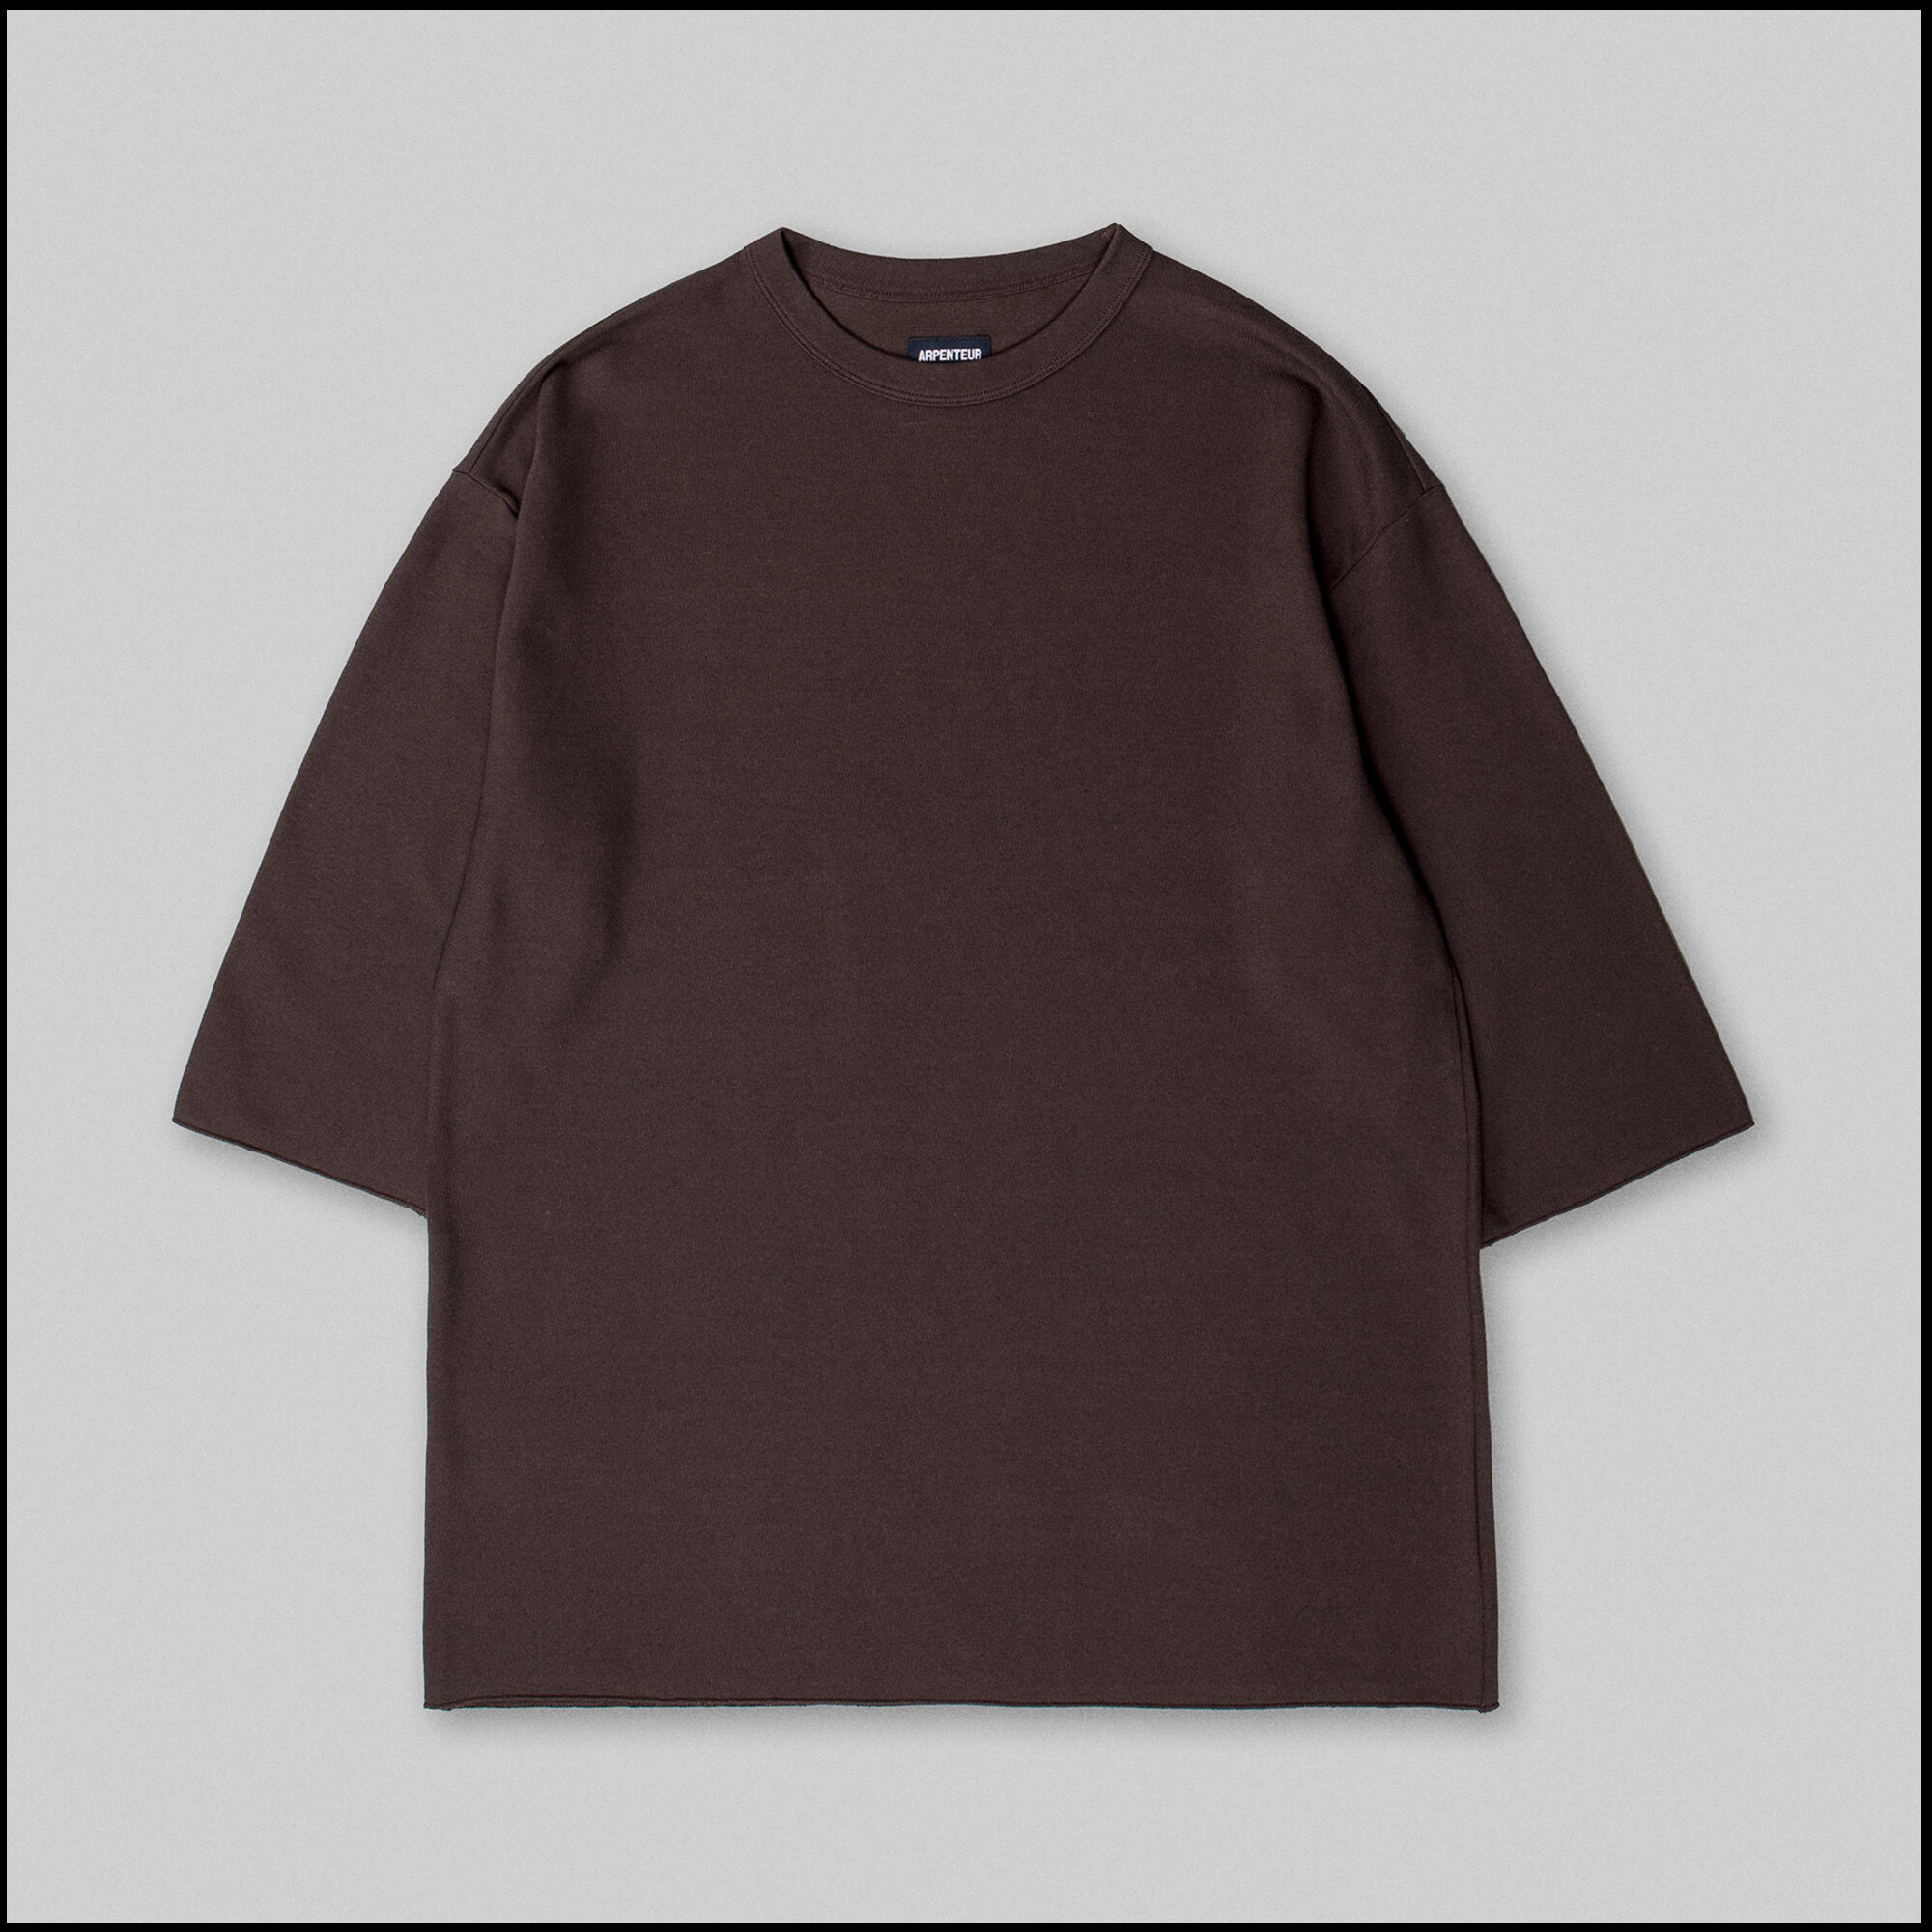 MARINIERE t-shirt by Arpenteur in Soil brown color